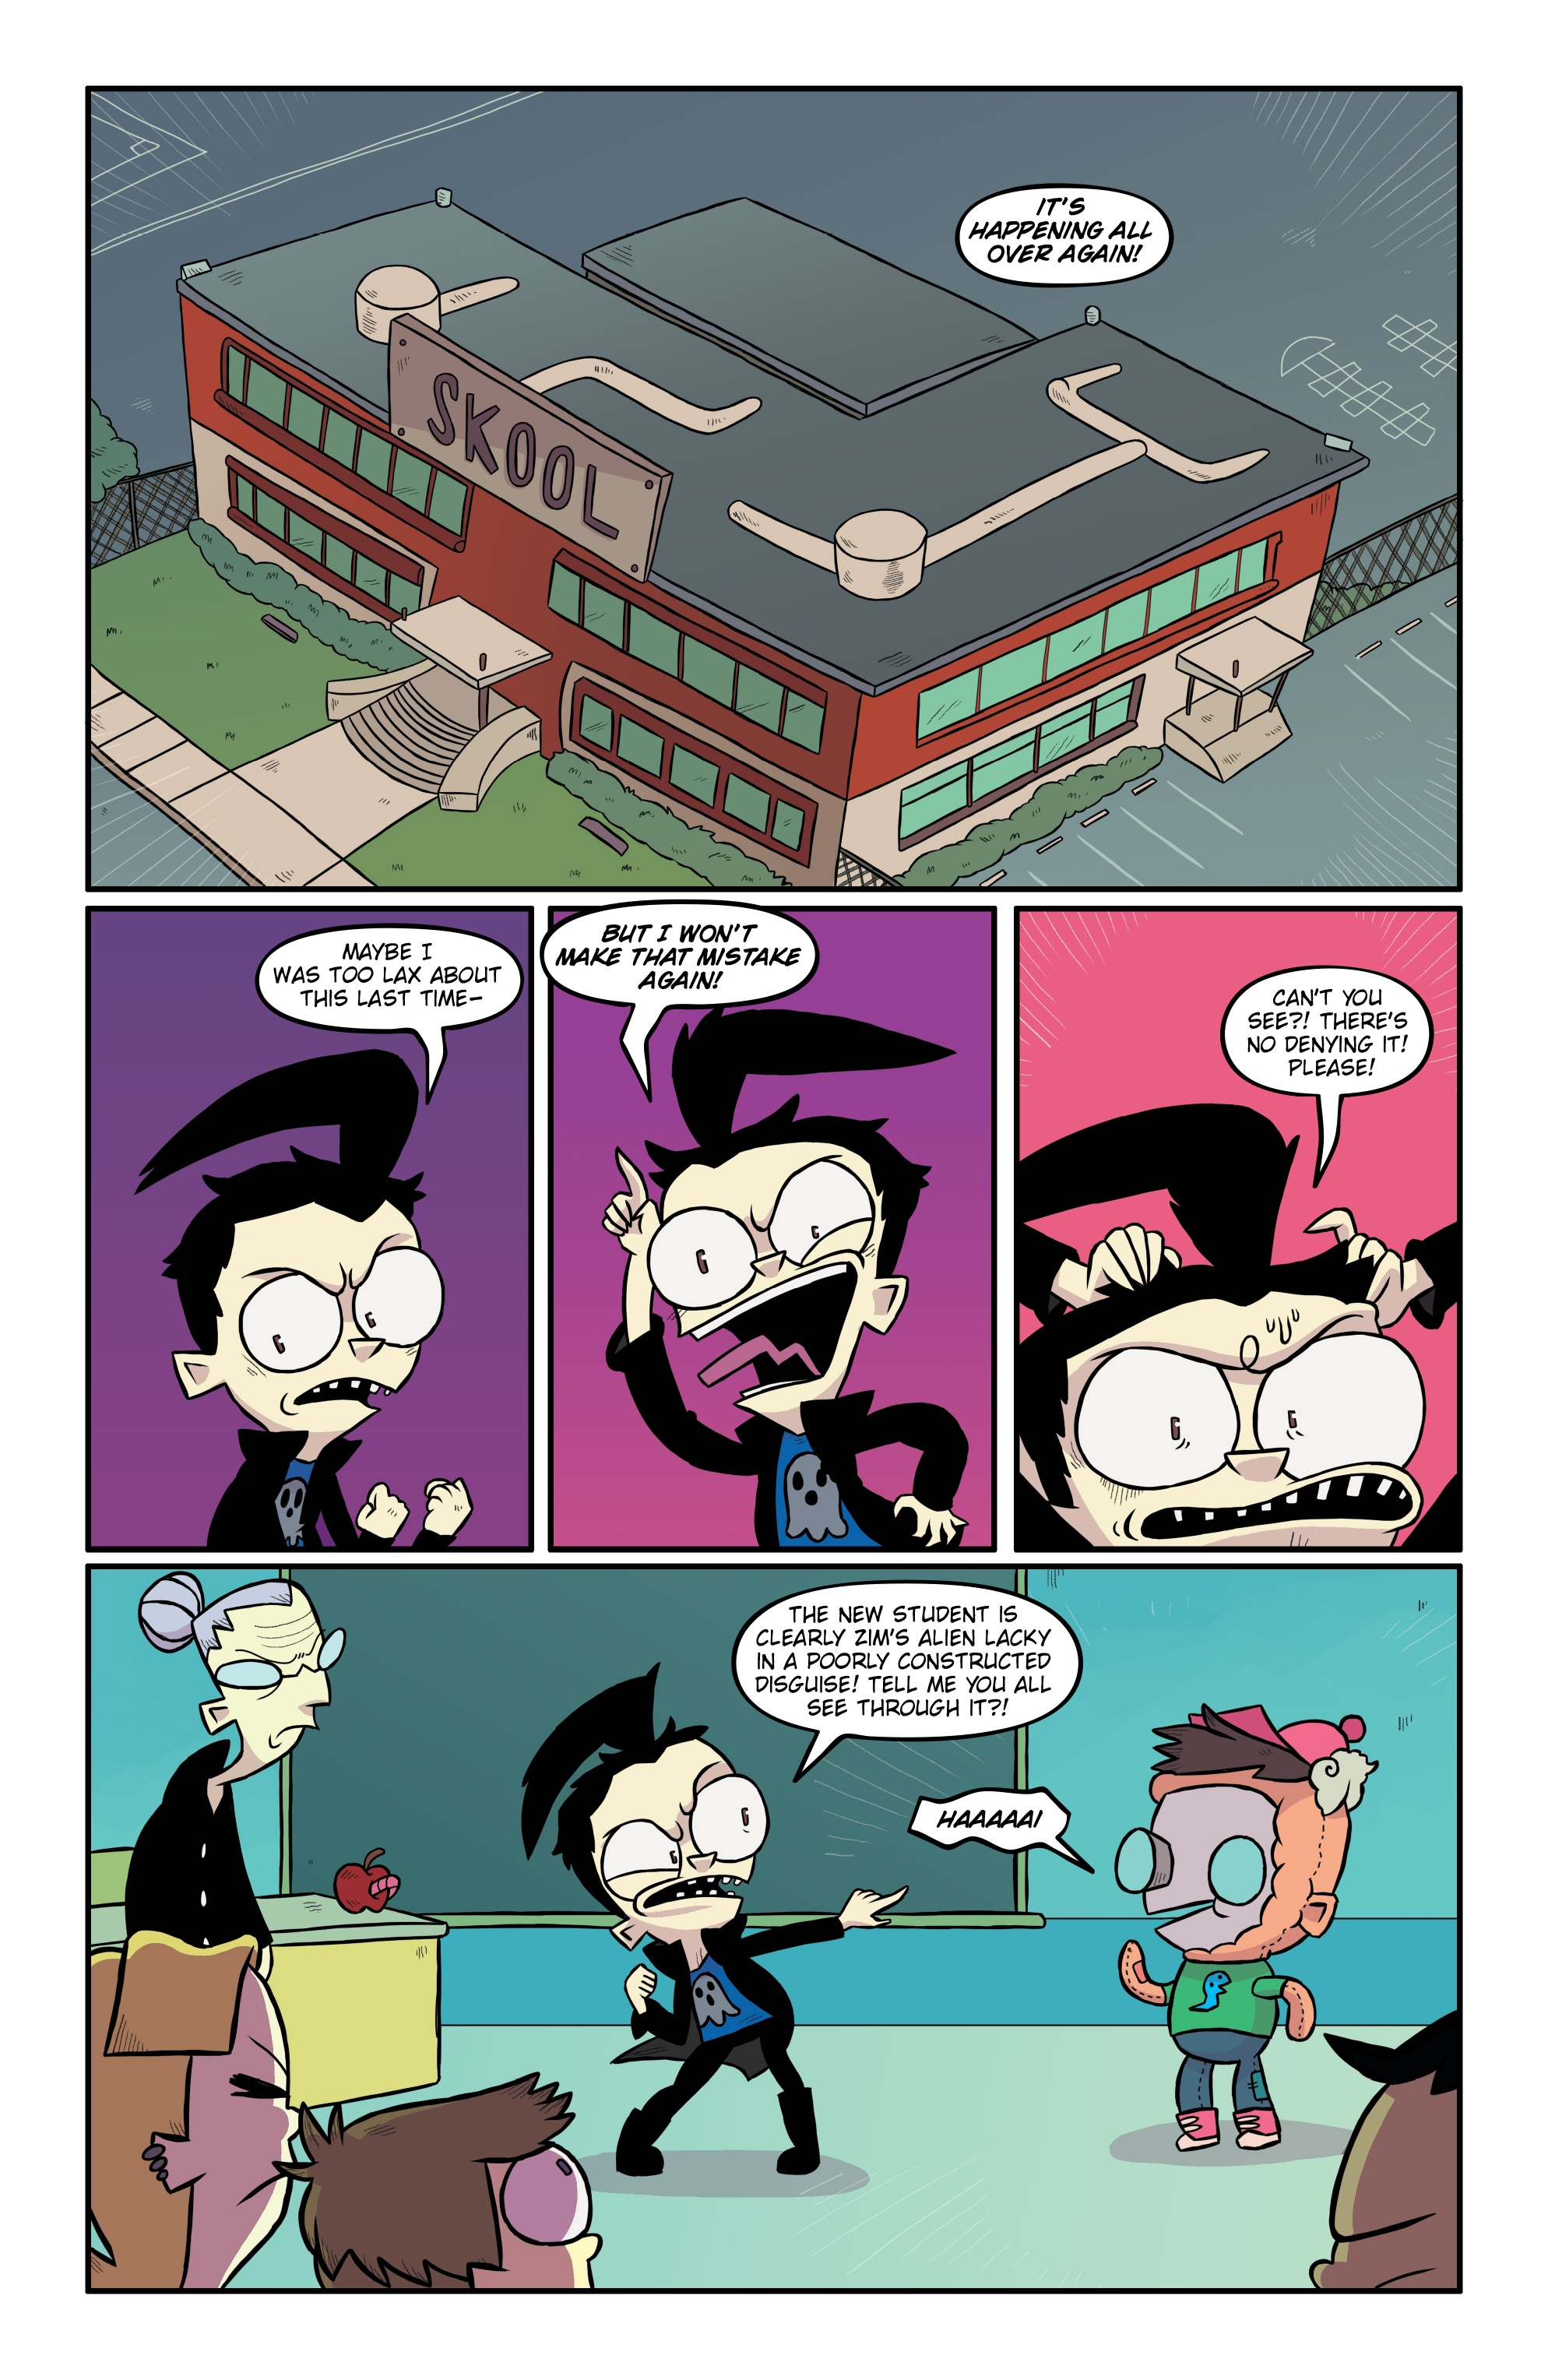 Invader Zim (2015-): Chapter 26 - Page 3